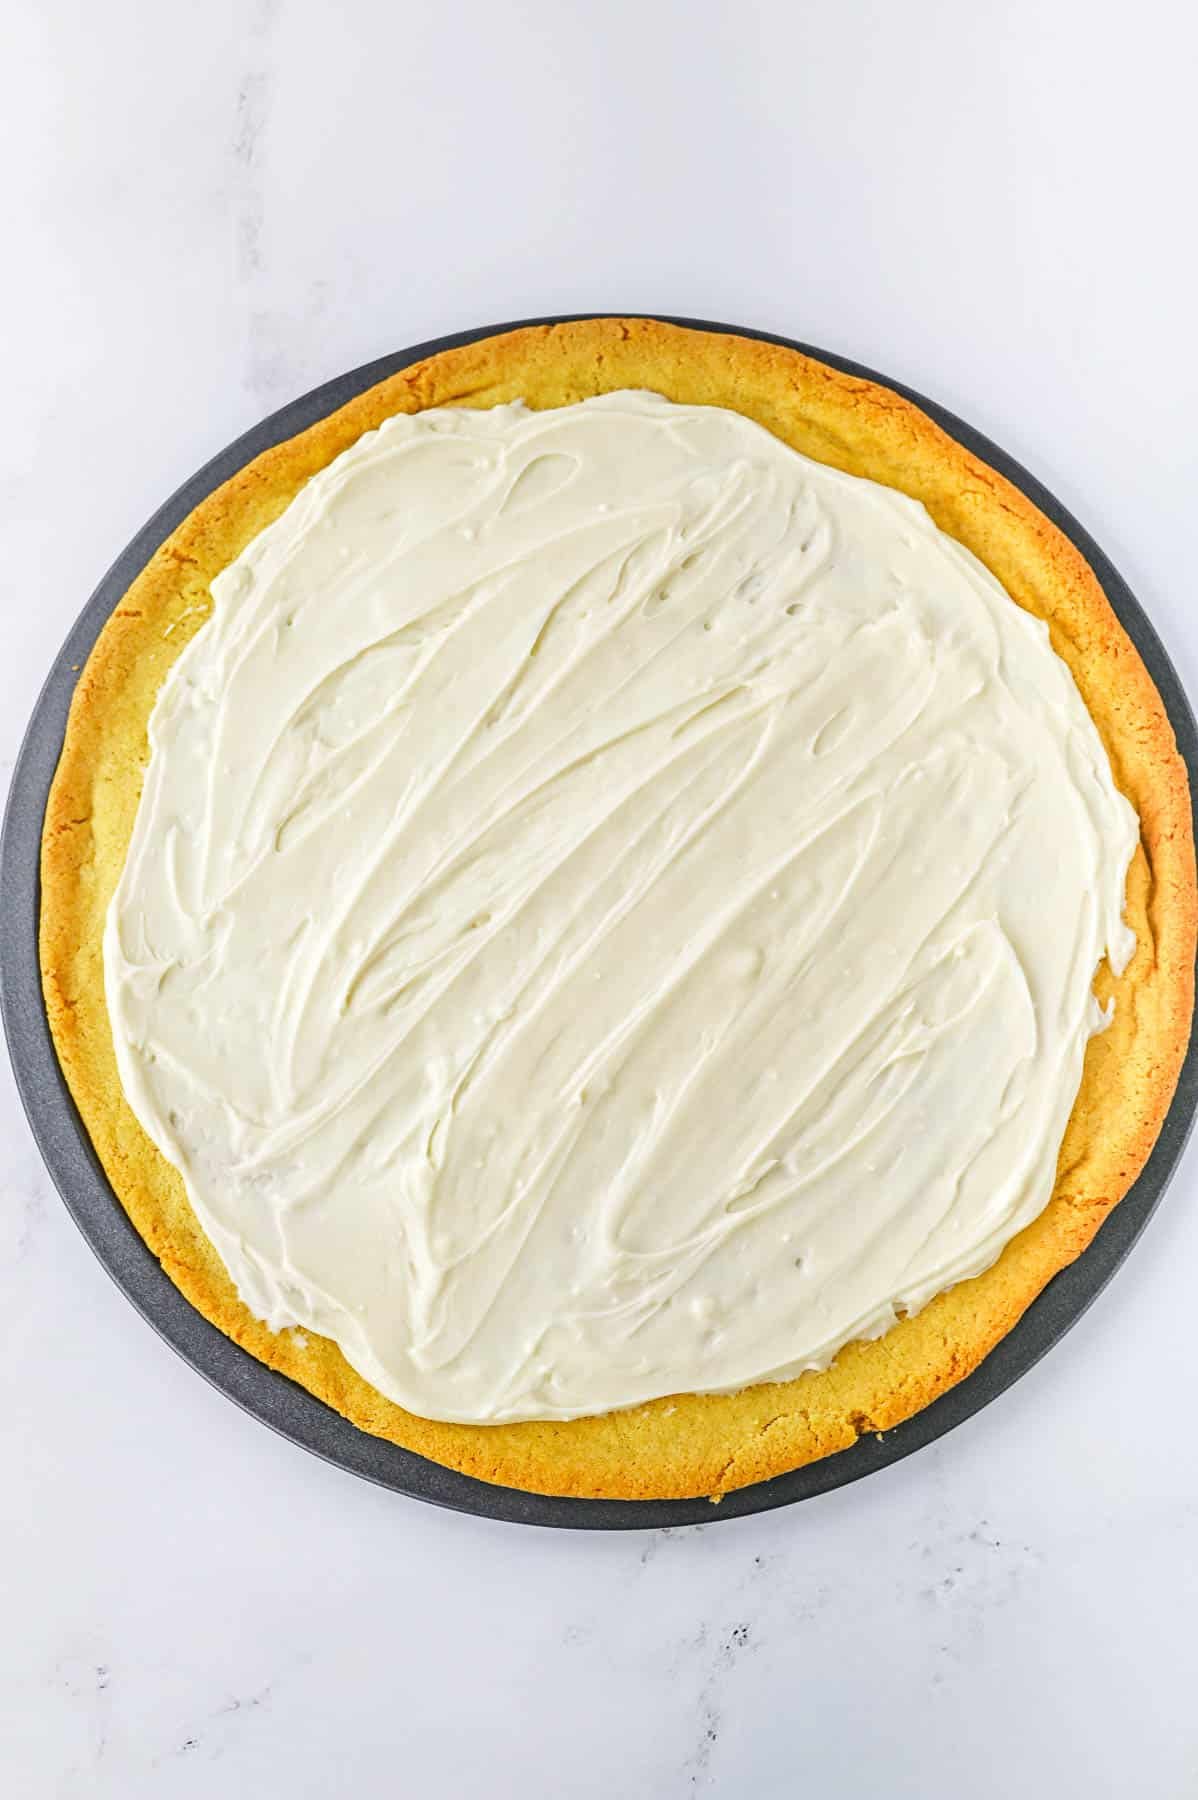 Cream cheese mixture spread over cookie crust on pizza pan.